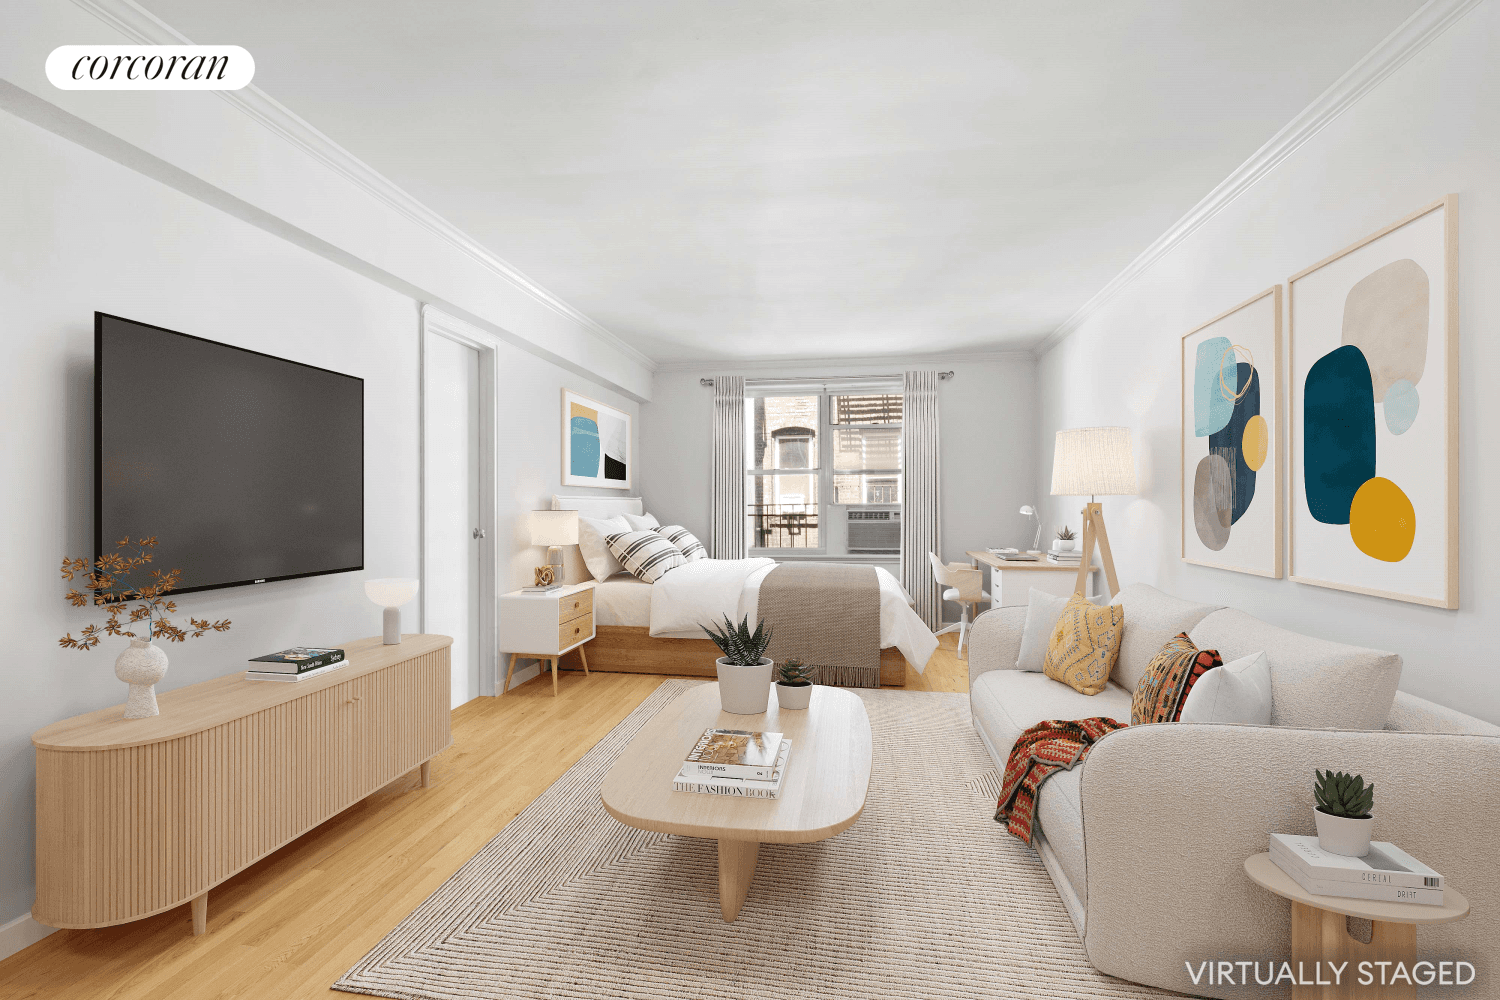 Upper East Side Gem Welcome to this charming and comfortable studio with updated kitchen and bath, excellent storage space, quiet western exposure, and very low monthly maintenance.